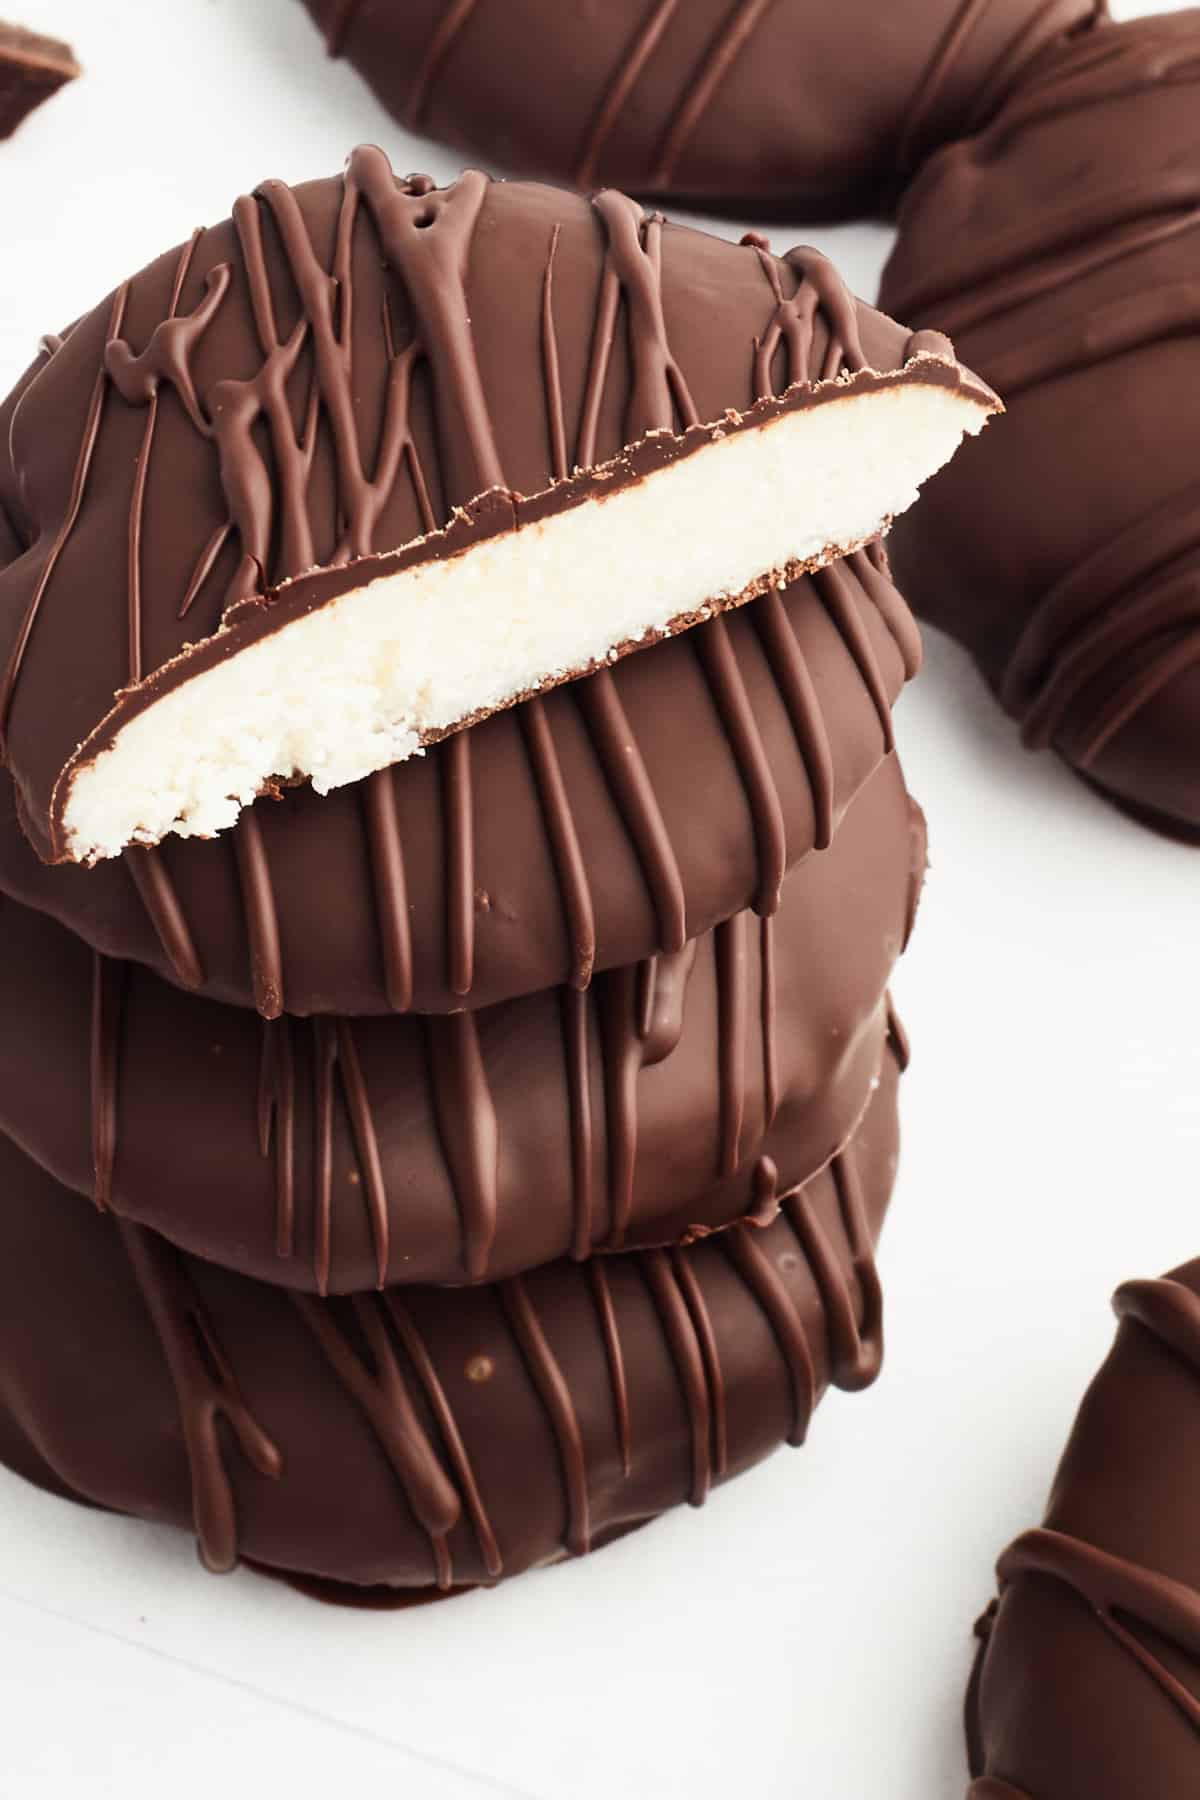 A stack of 4 peppermint patties on a white surface, with more sitting next to the stack. The top one on the stack is sliced open to see the bright white peppermint filling.